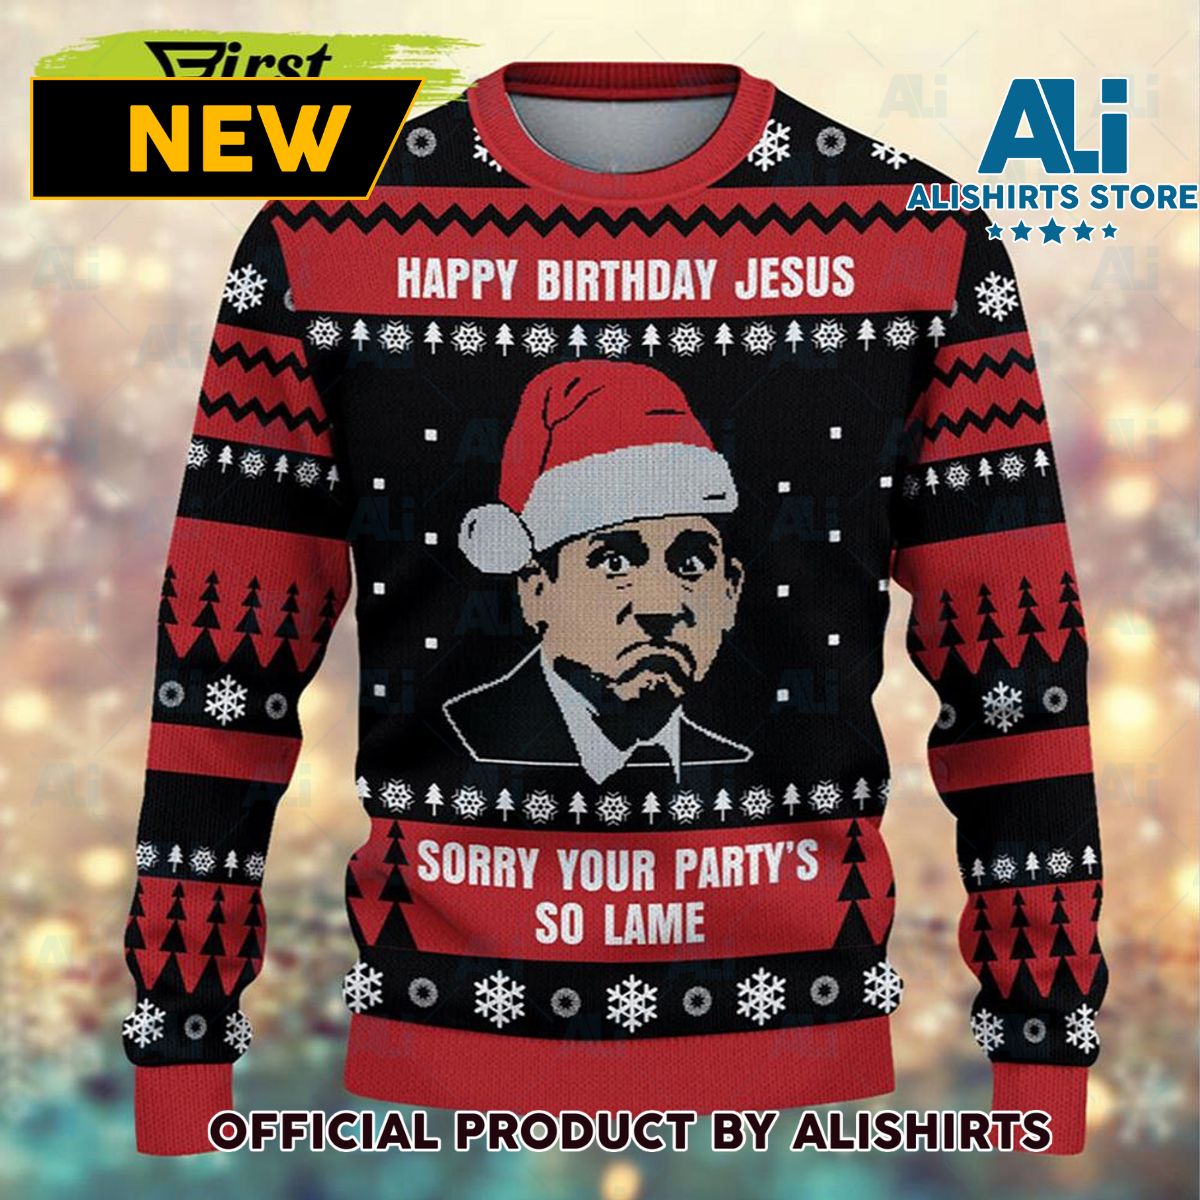 Your Partyís So Lame Ugly Michael Scott The Office Ugly Christmas Sweater